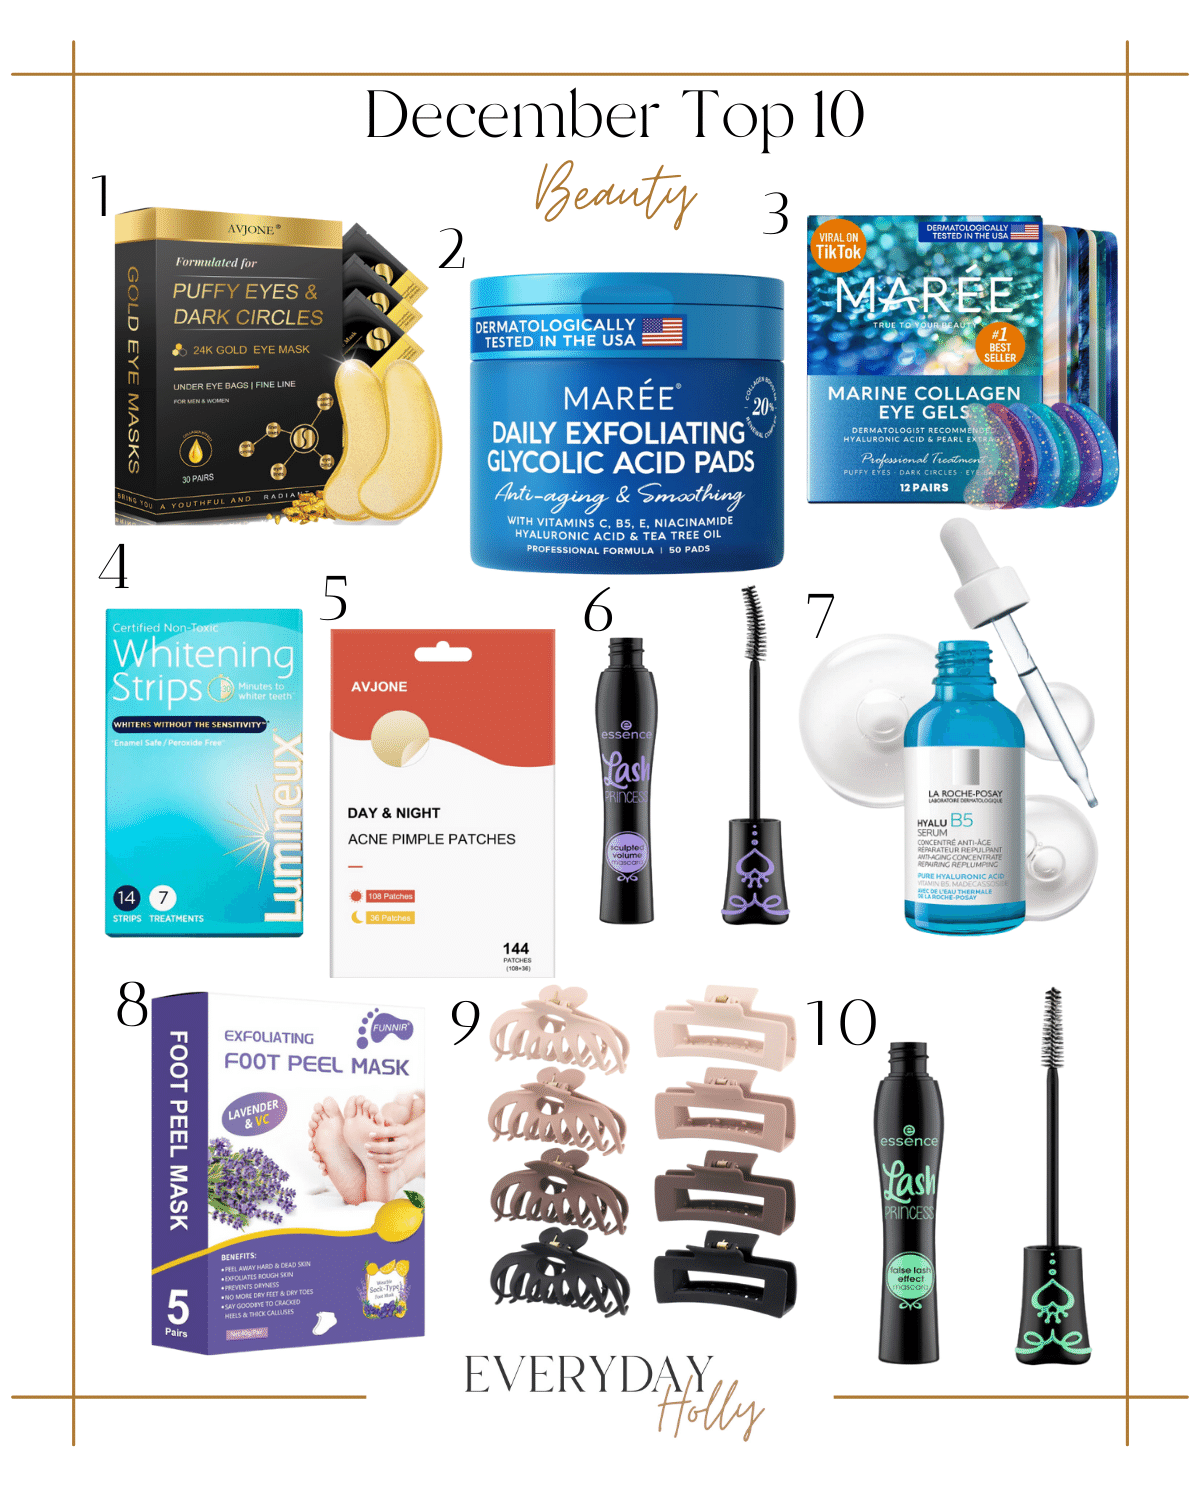 Hottest best sellers from december | #hottest #best #sellers #december #2023 #topseller #beauty #skincare #selfcare #eyemask #pads #larocheposay #mascara #teethwhitening #pimplepatch #clawclip #footpeel #neutral